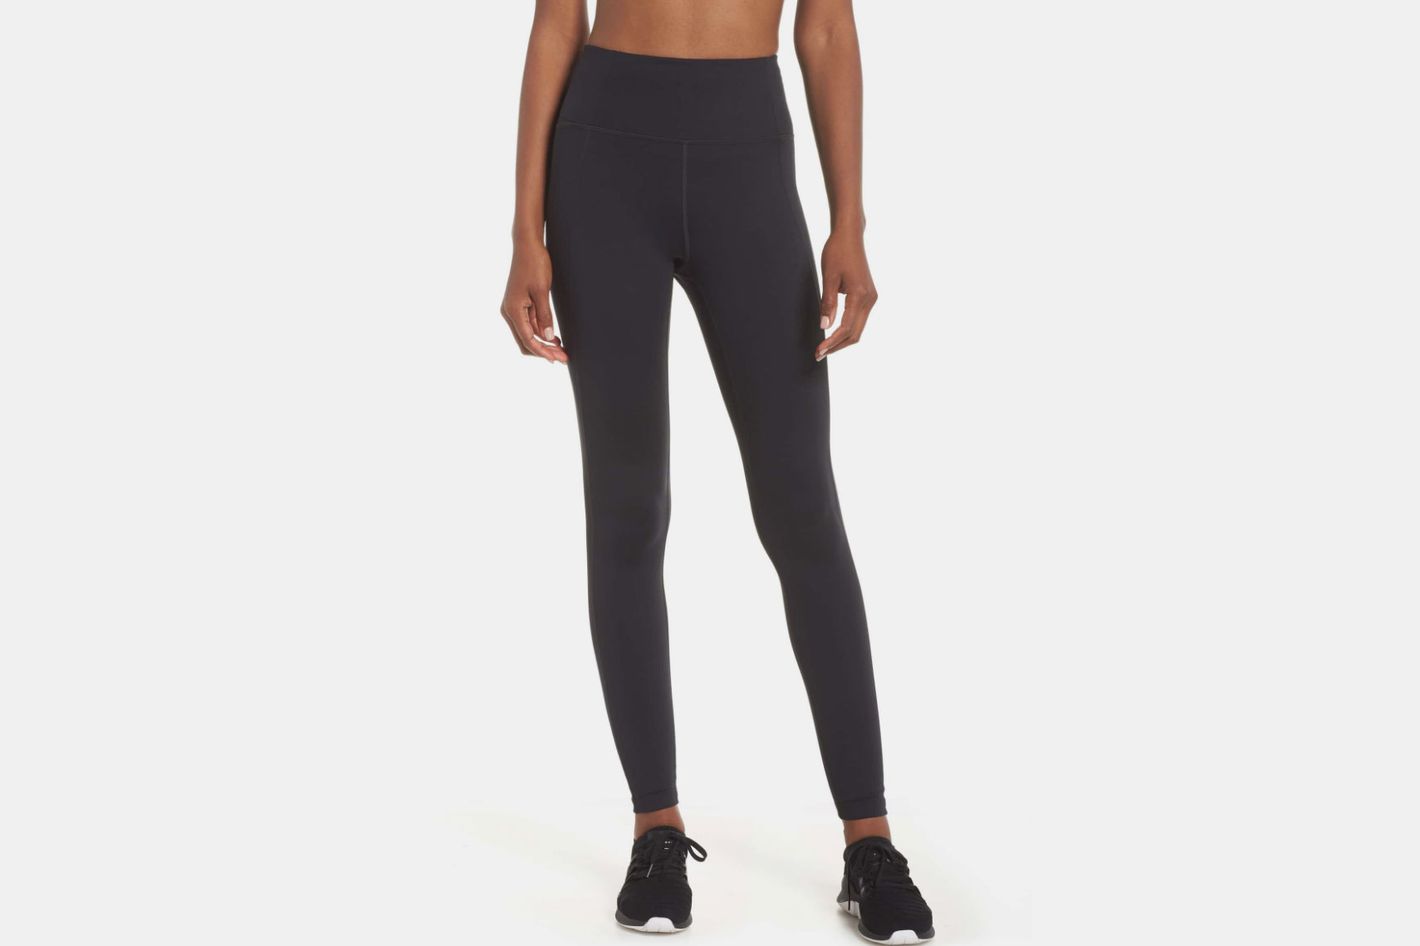 Get the Perfect Workout Look with Women's Training T10 Pants